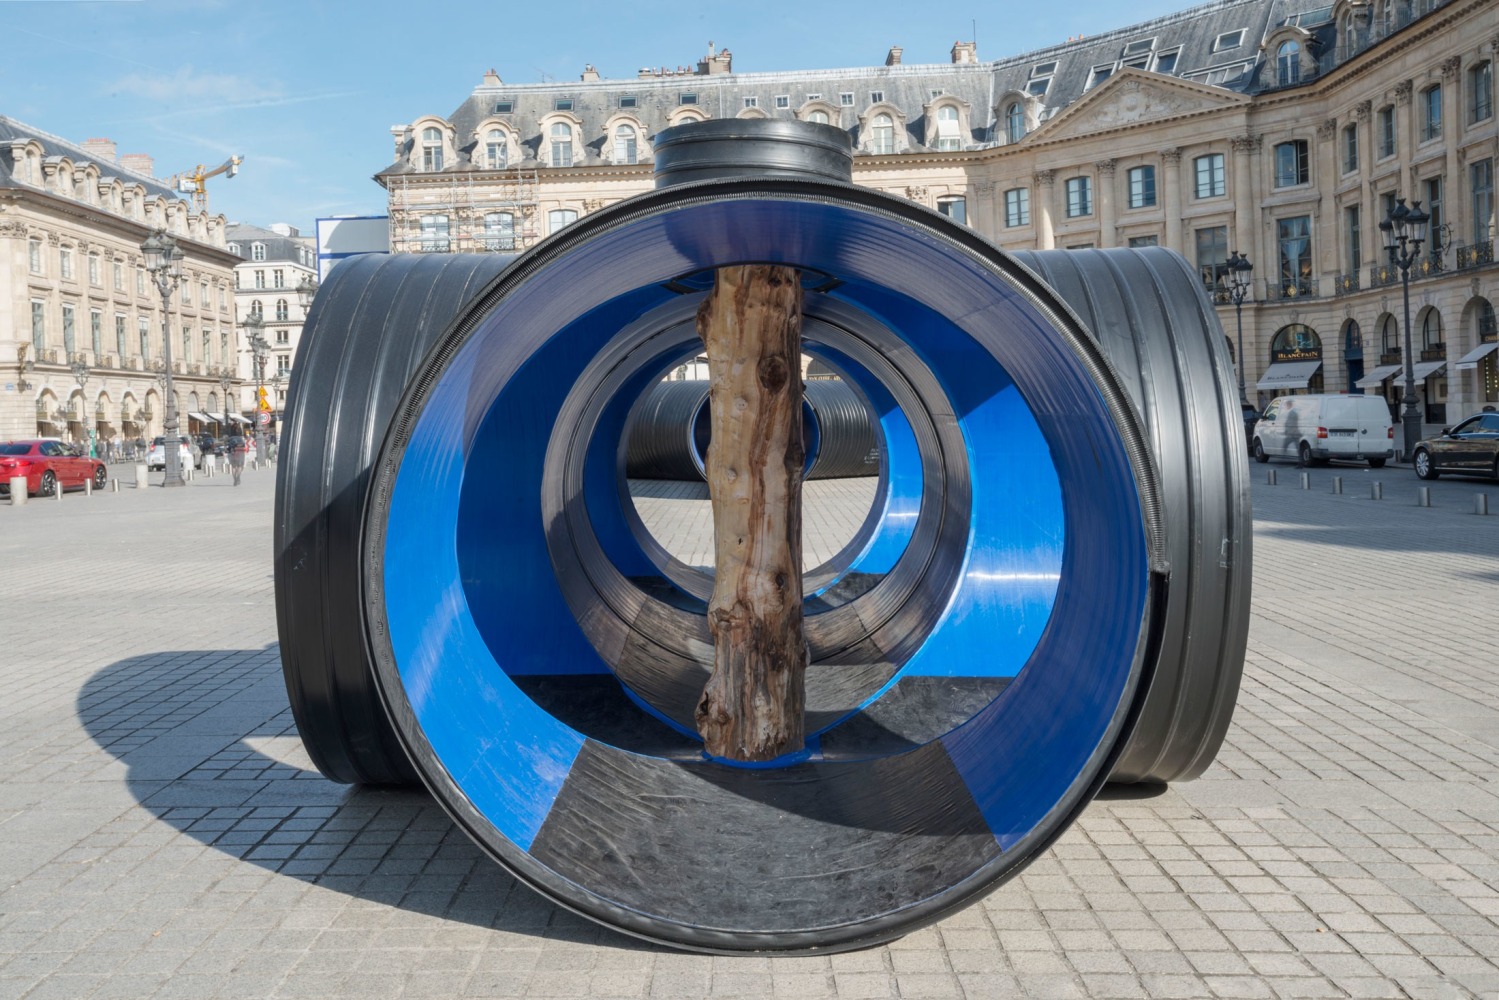 Oscar Tuazon
Water Column, 2017
One of four elements in&amp;nbsp;Une Colonne d&amp;#39;Eau, 2017
Thermoplastic hoses, tree trunks
105 2/3 x 82 3/4 x 315 inches
(268 x 210 x 800 cm)
Installation view
Place Vend&amp;ocirc;me, Paris (October 16 &amp;ndash; November 9, 2017)
Photograph by Marc Domage